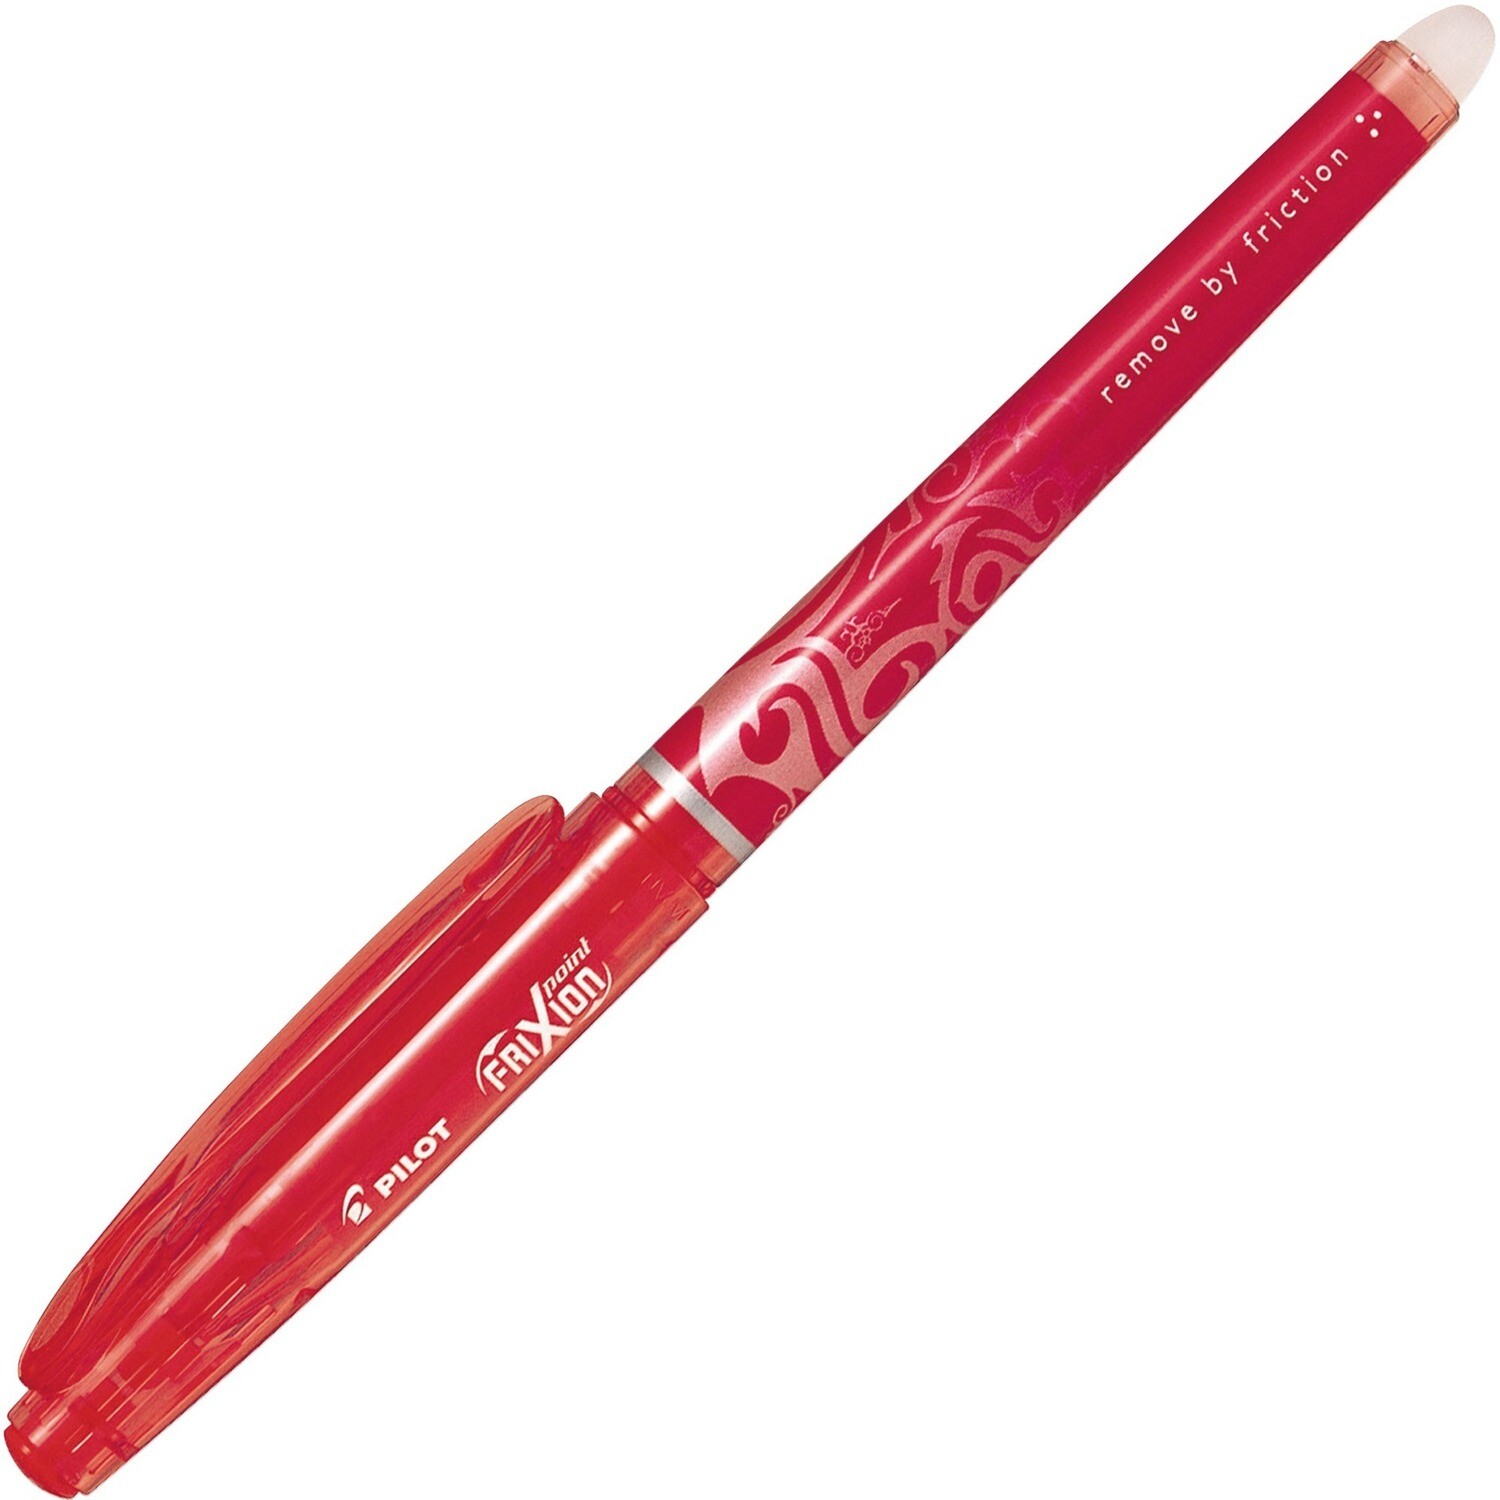 Pen, Erasable, Gel Rollerball, FriXion Red, Single, 0.5 Mm